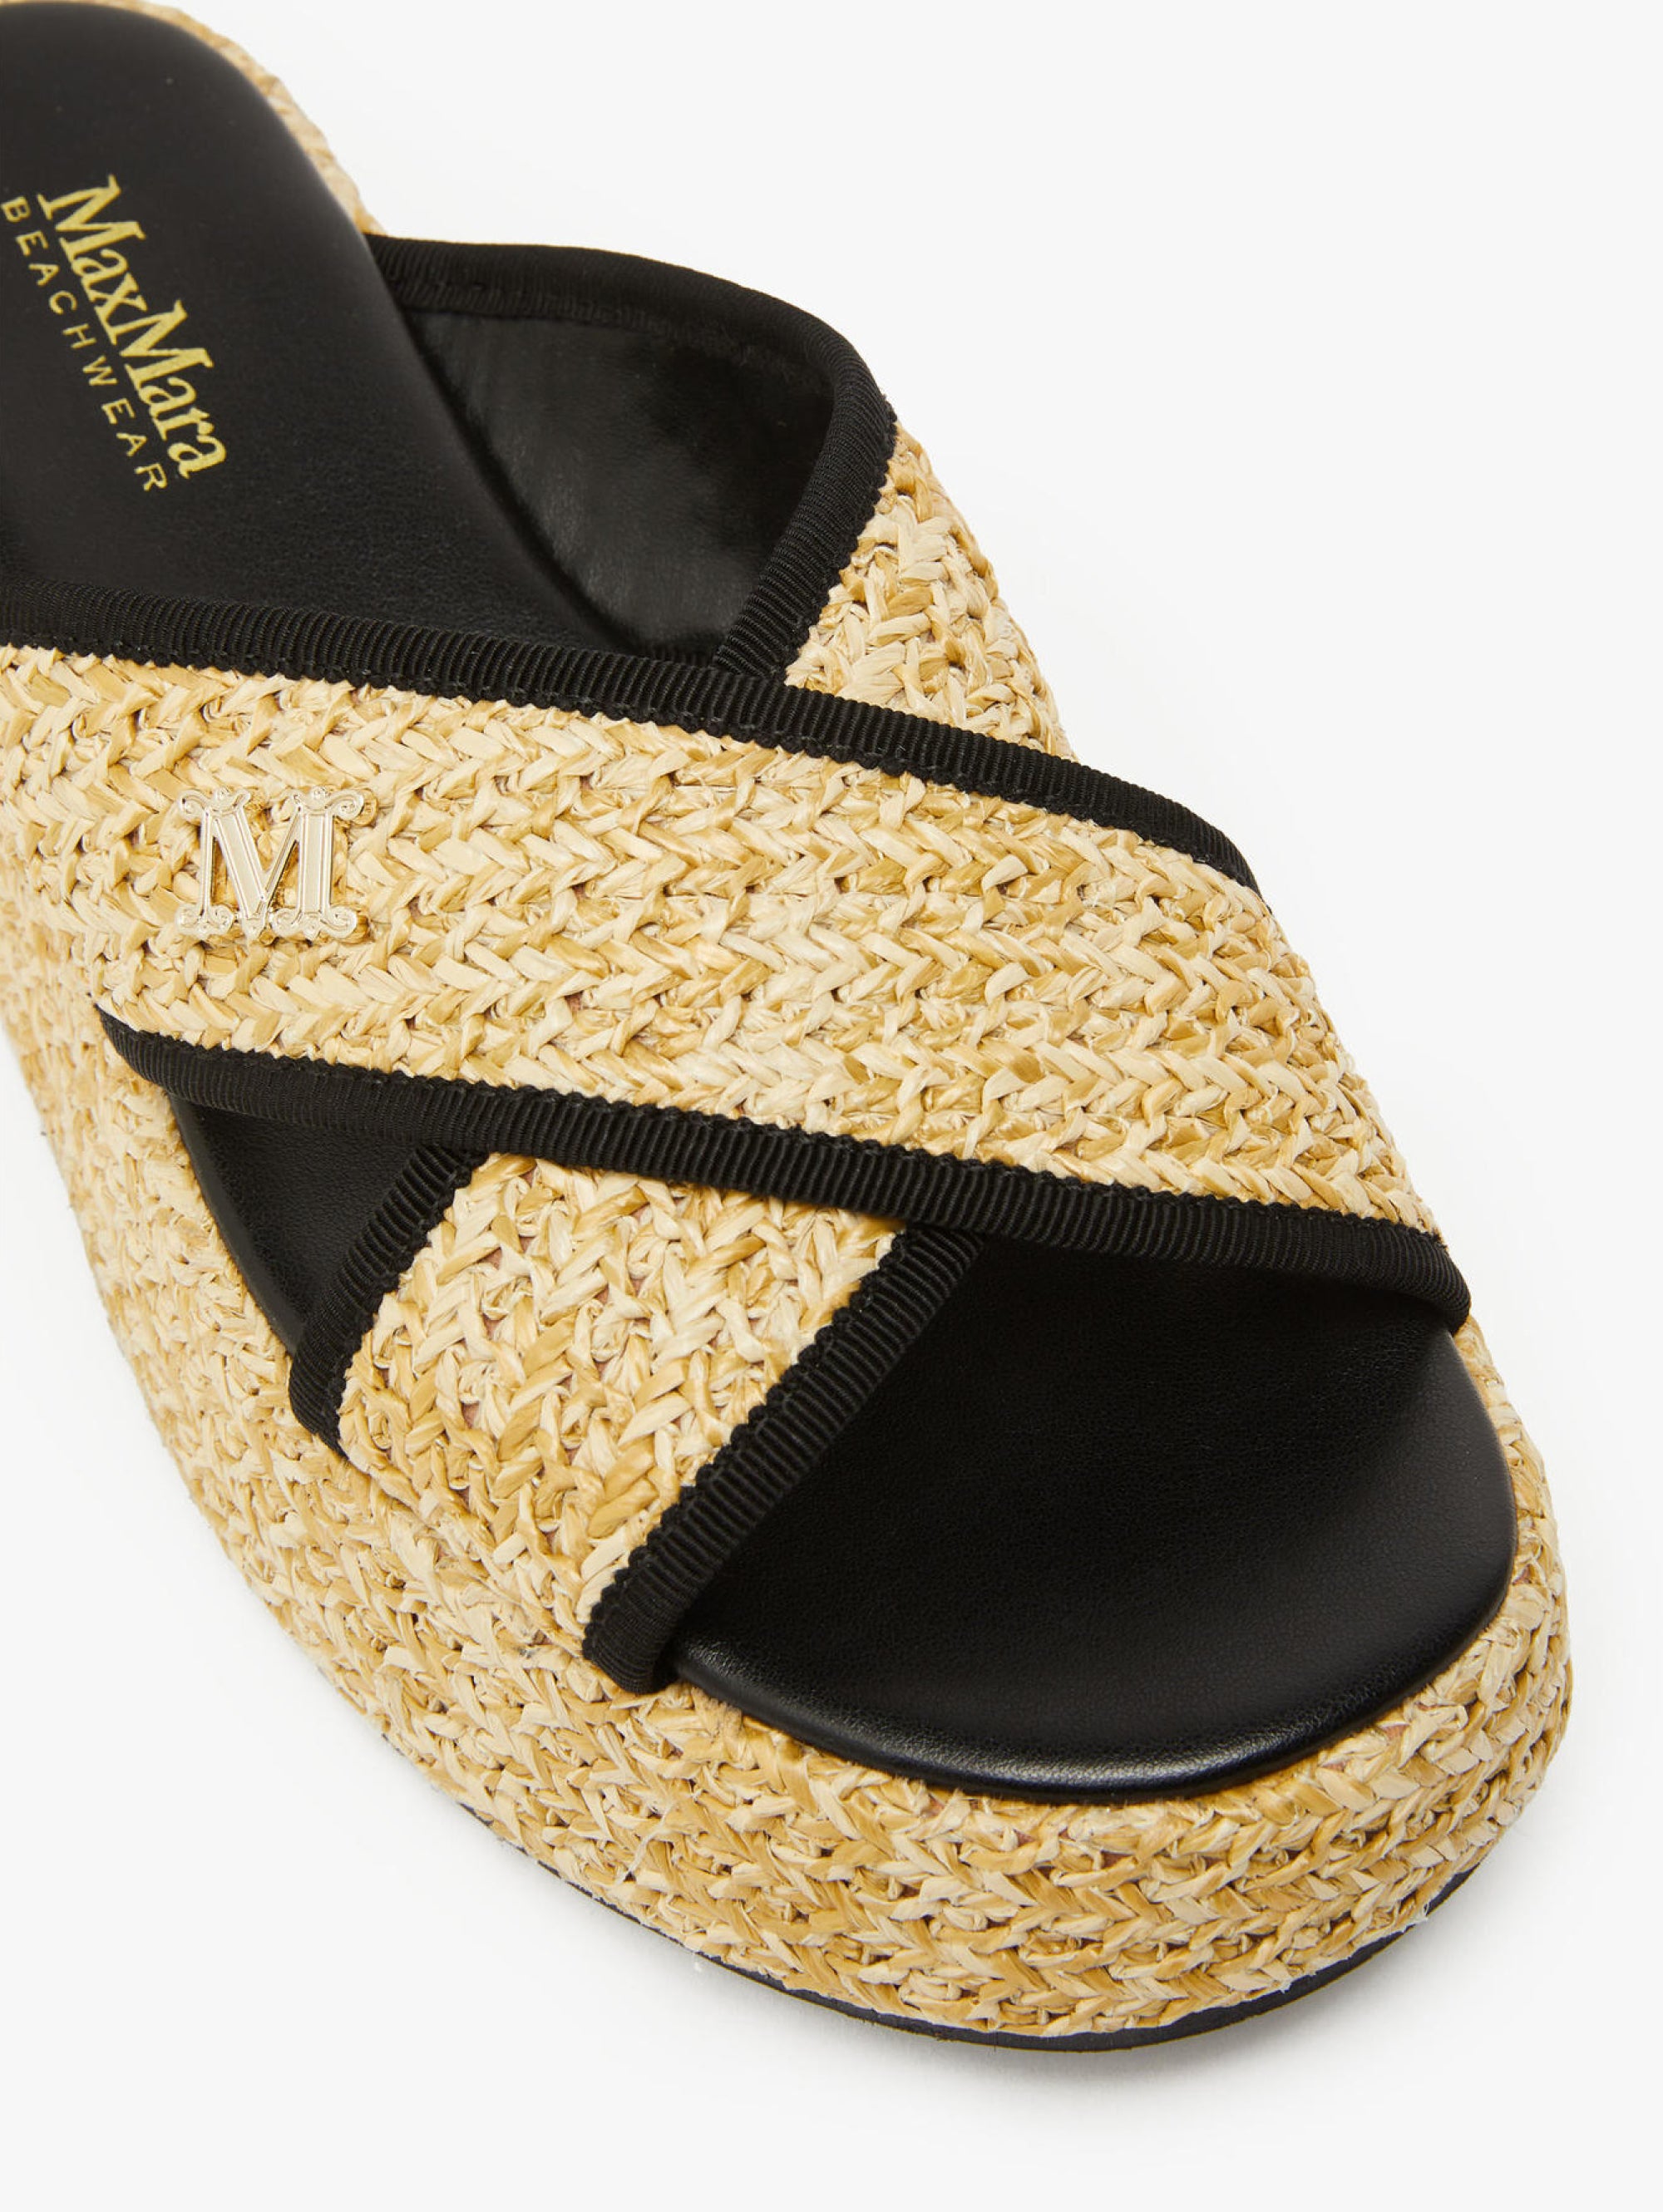 Sandals with Wedge and Cross Band in Beige Raffia